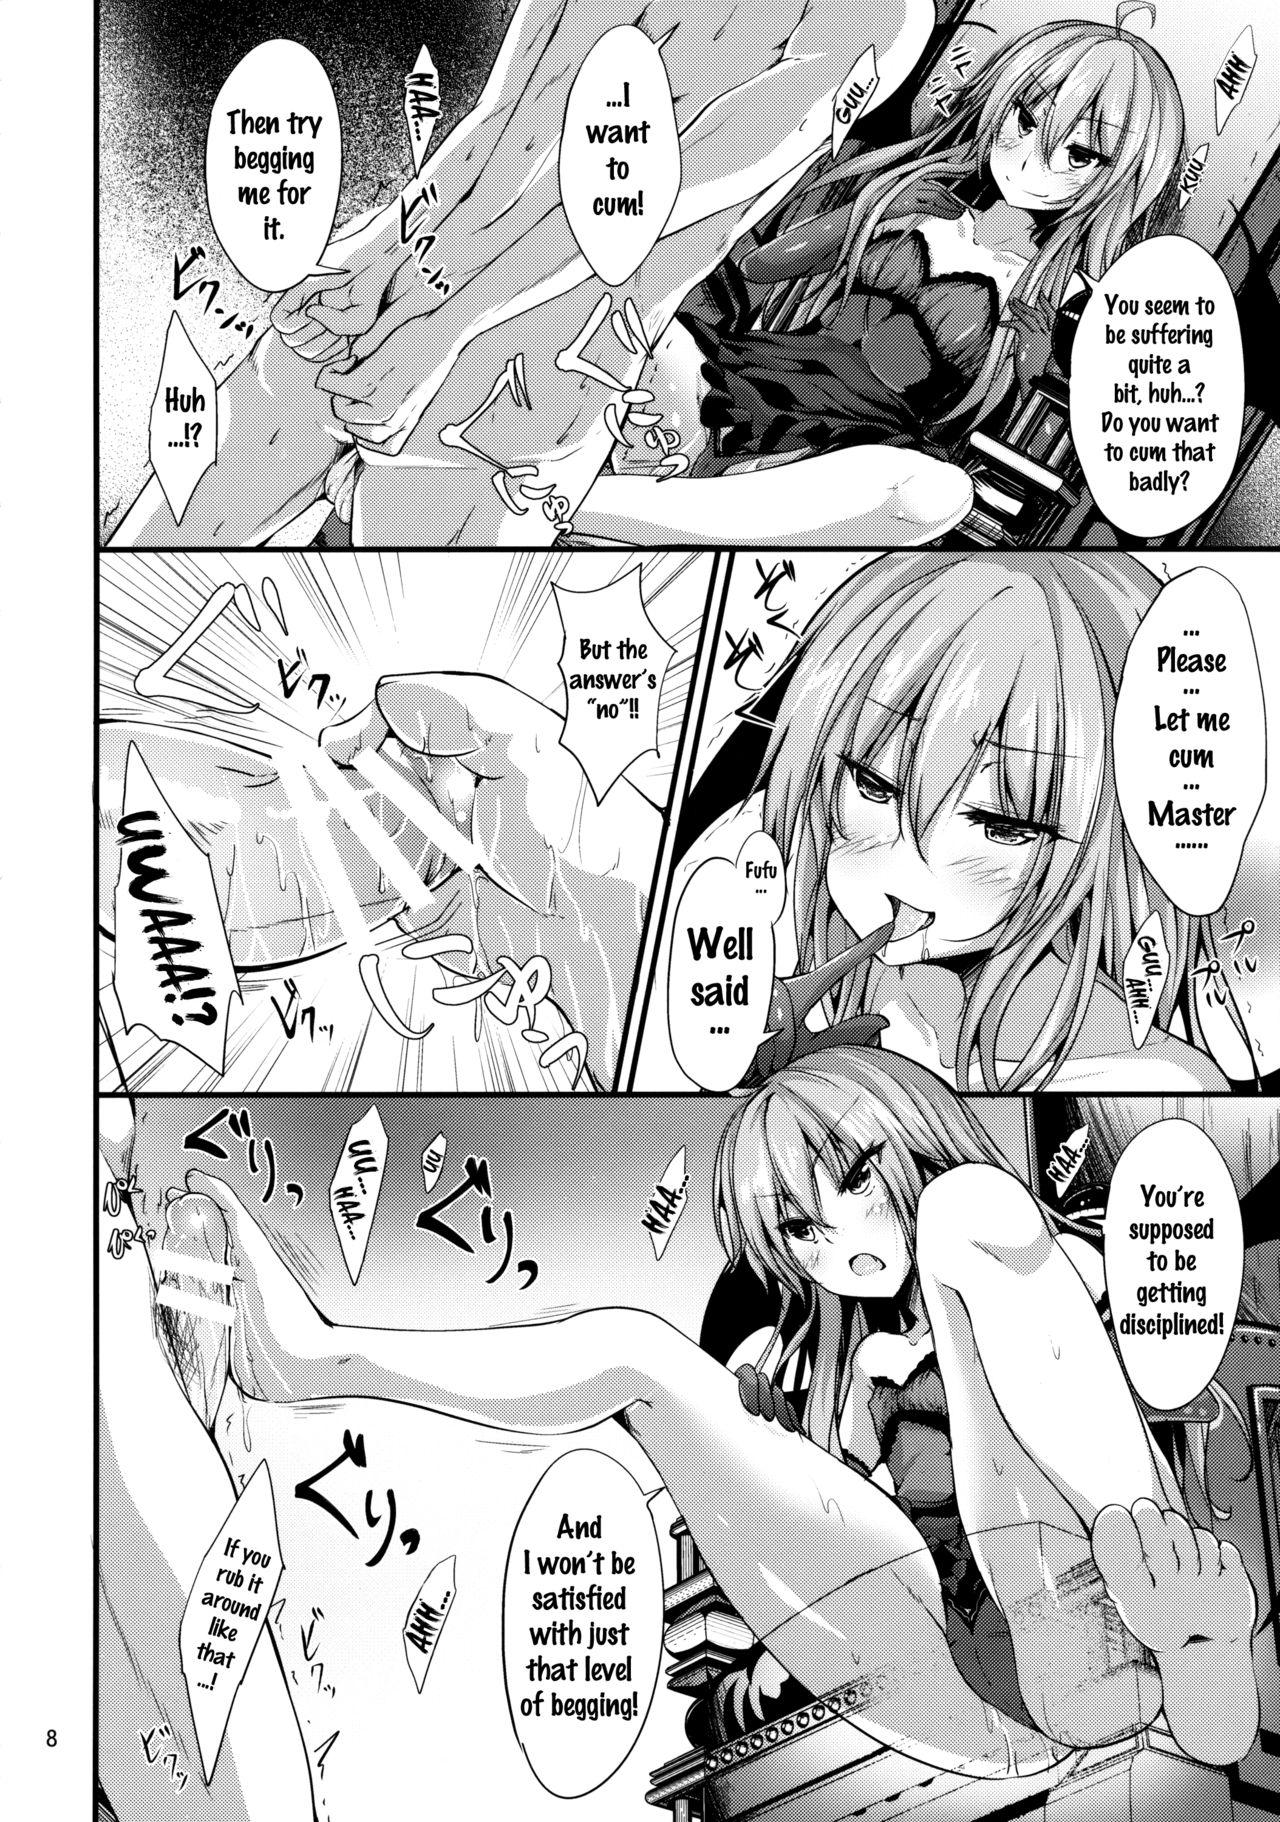 Car Remi no Motto Otona ni Narumon! | Remi's Becoming More of An Adult! - Touhou project Clothed - Page 7